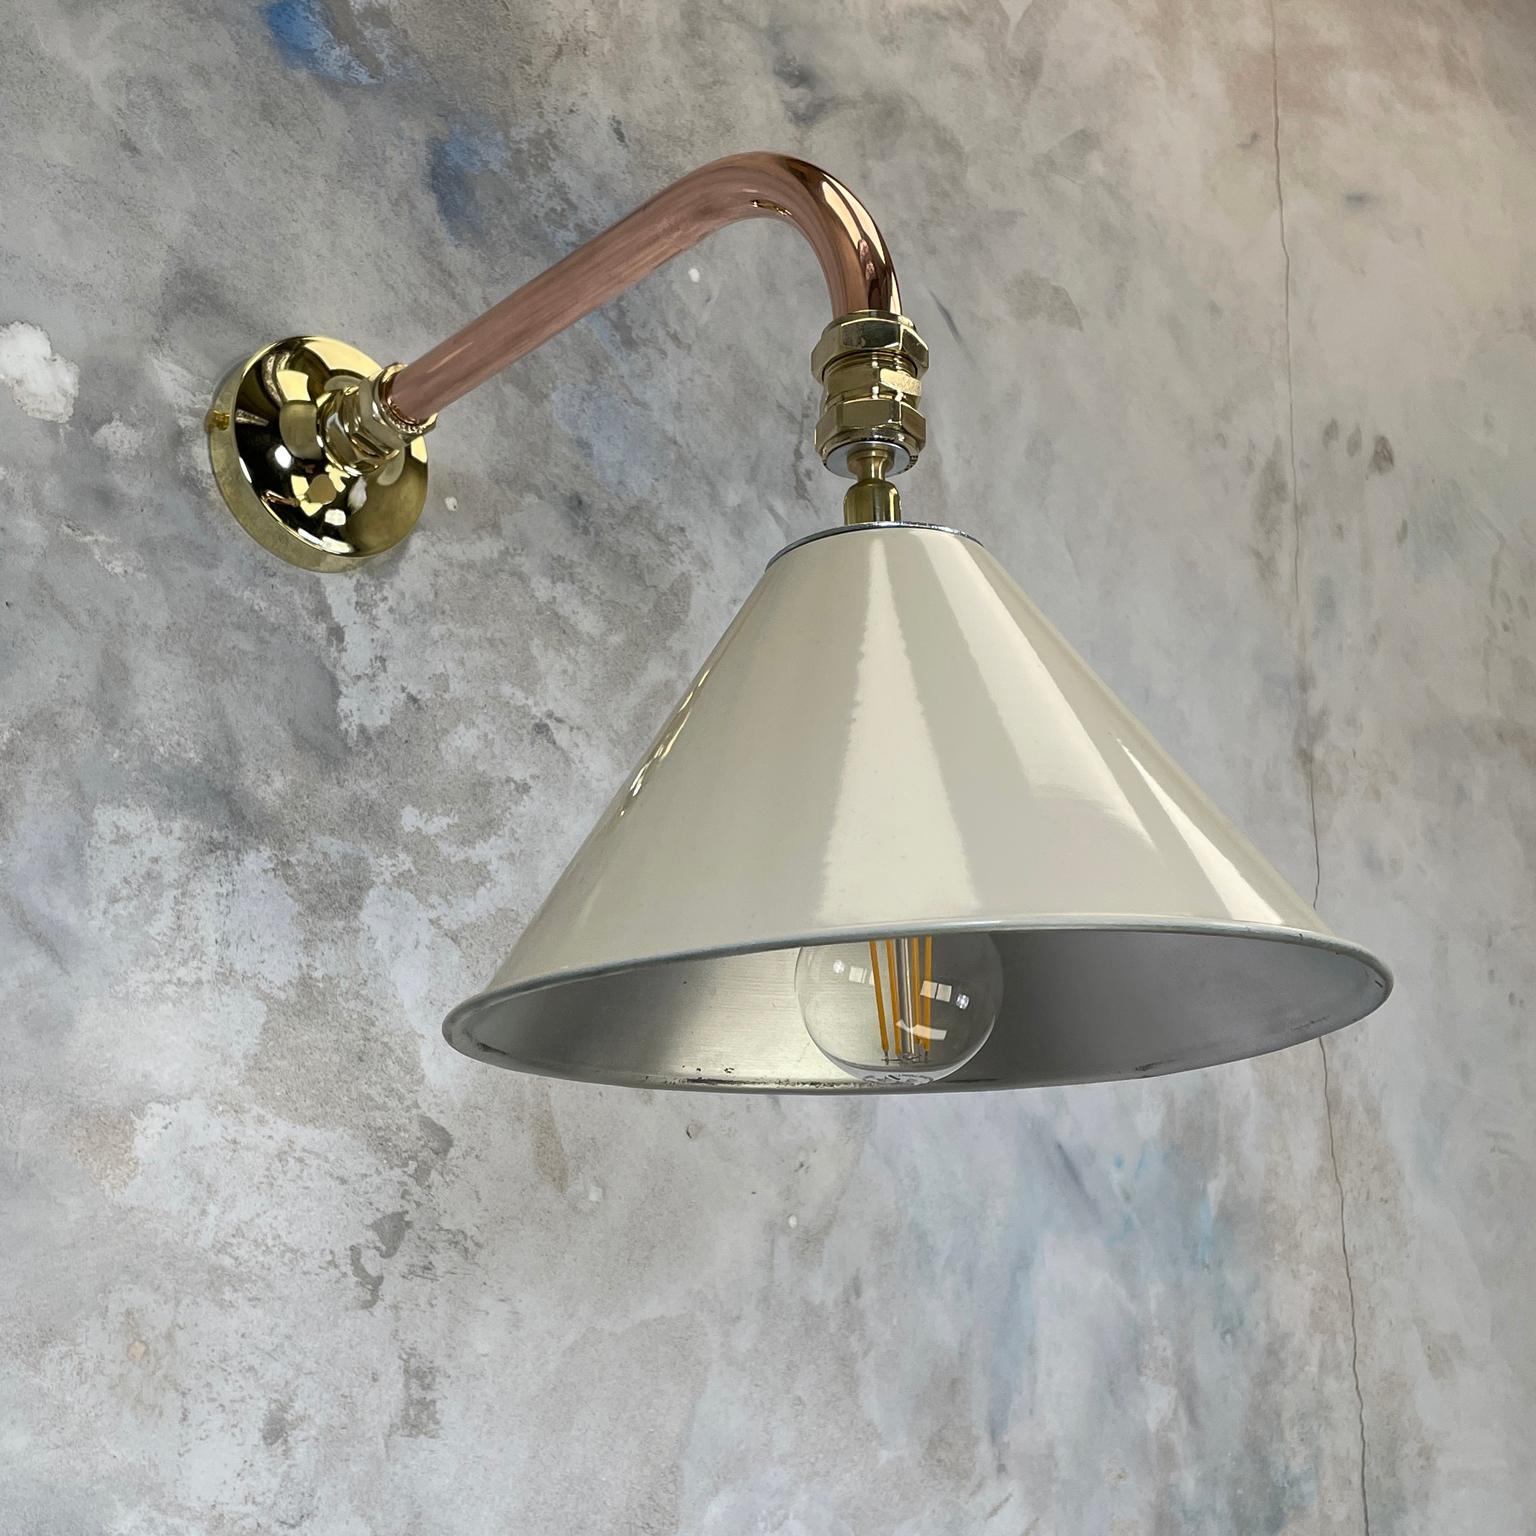 1980's Copper & Brass Cantilever Lamp Cream British Army Lamp Shade For Sale 9